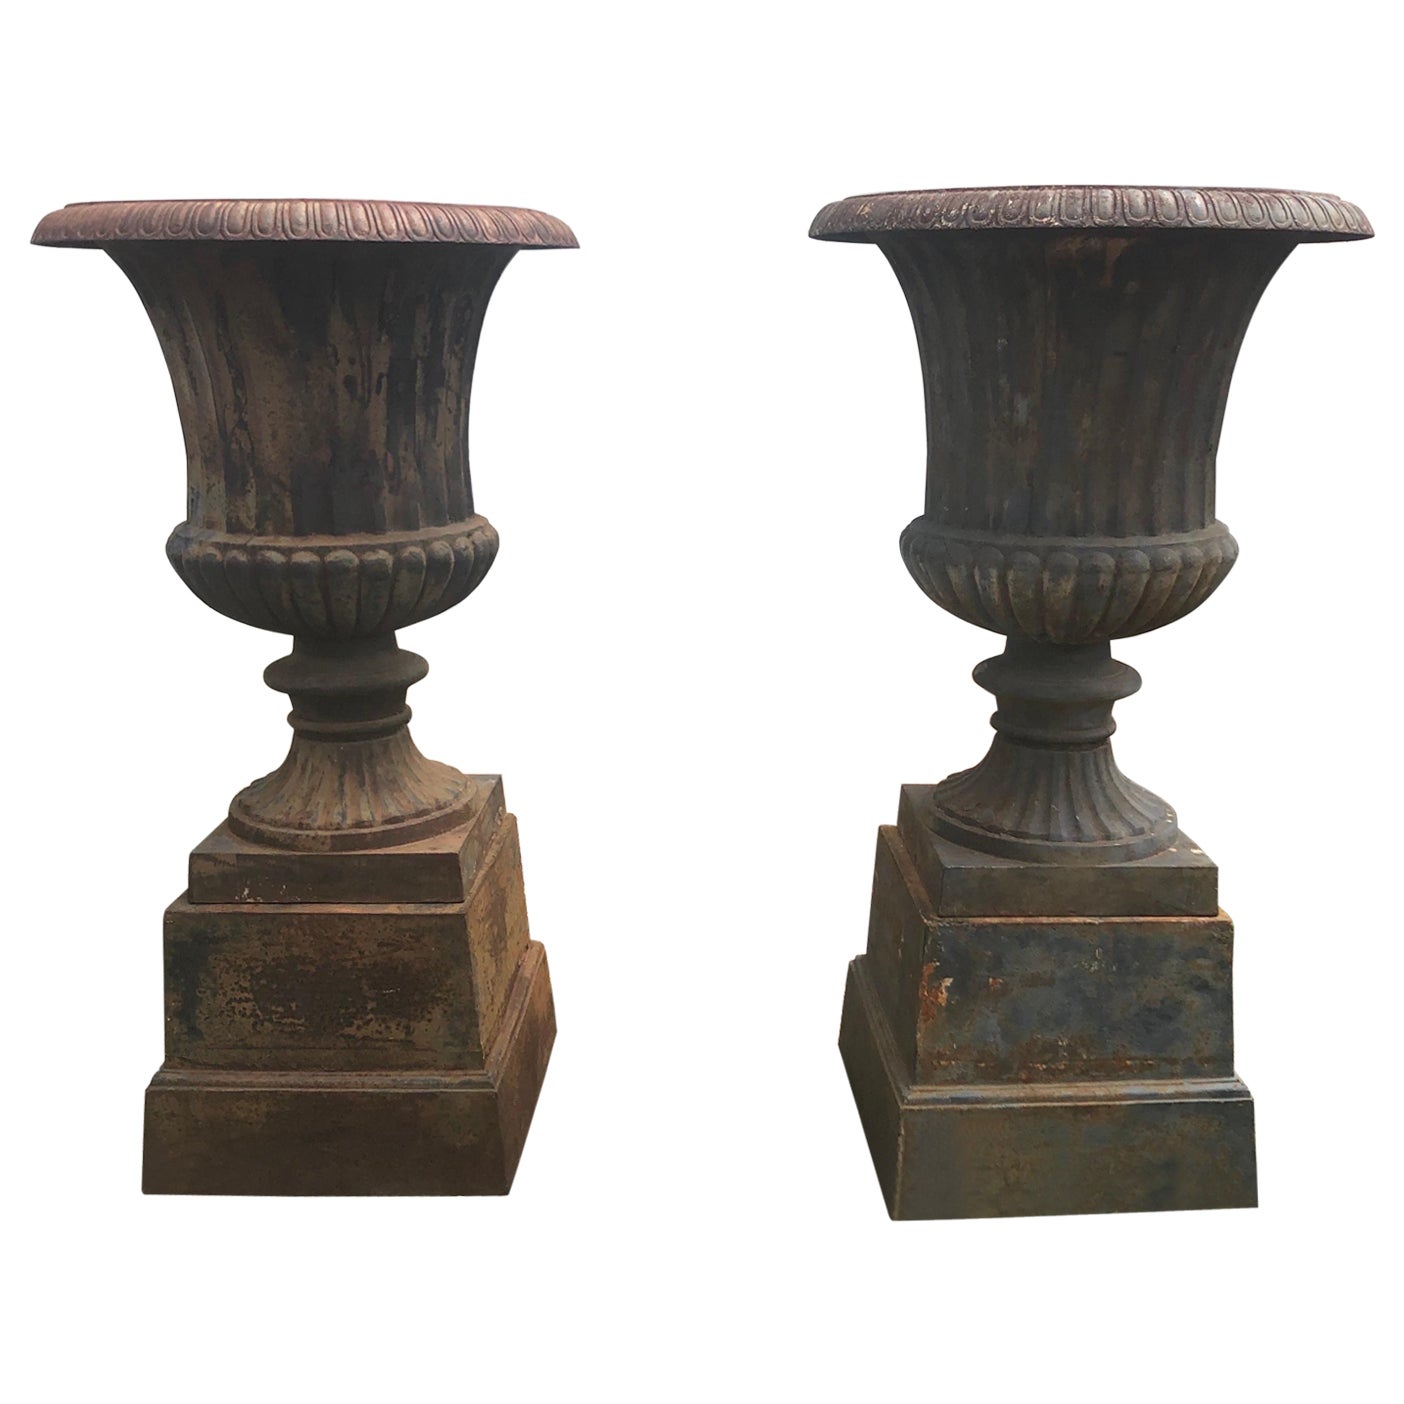 Pair of Palatial Cast Iron Garden Urns 53.5"H For Sale